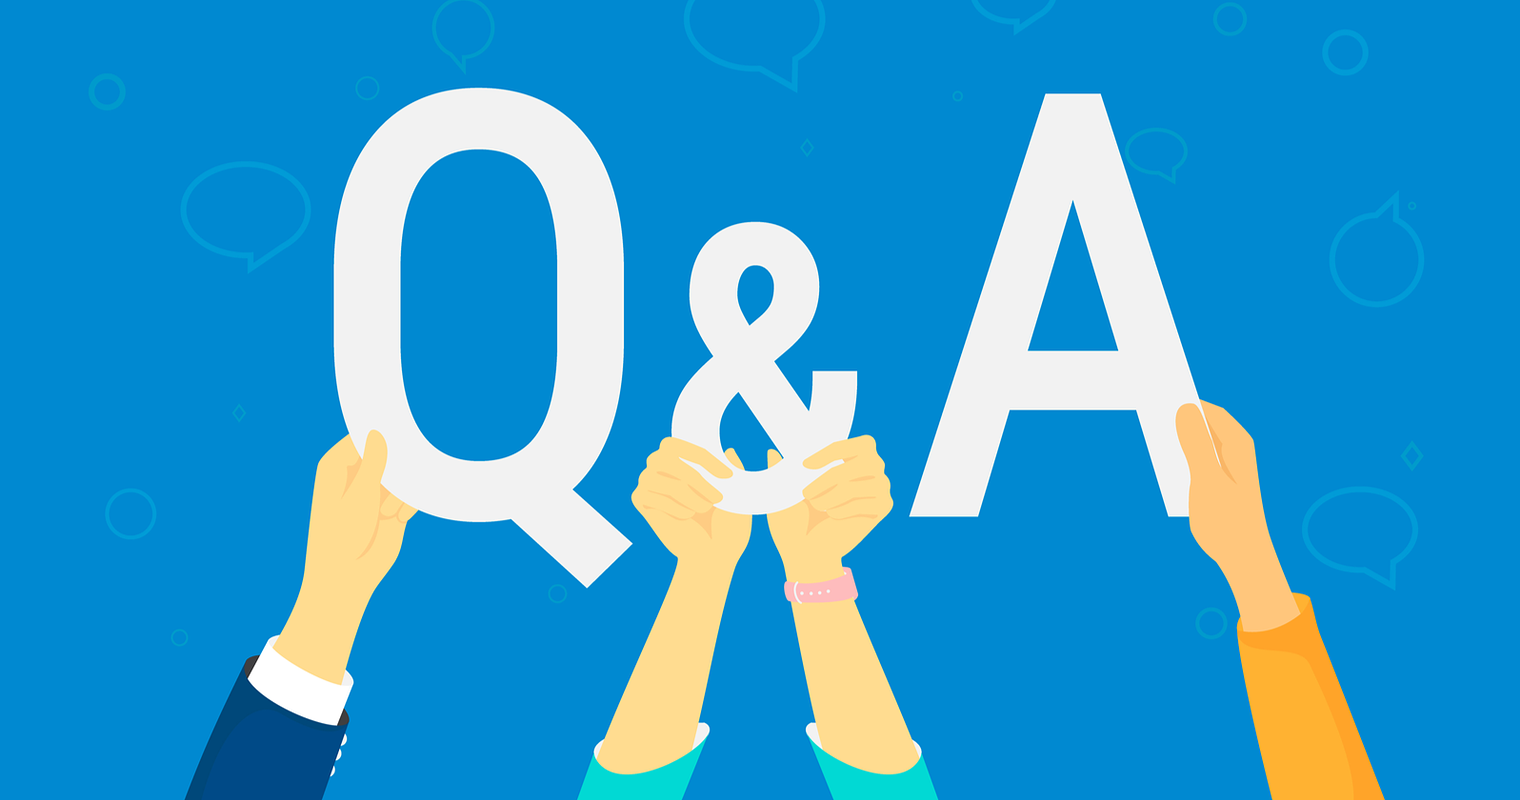 How to Make Compelling Q&A Videos to Build Trust in Your Brand